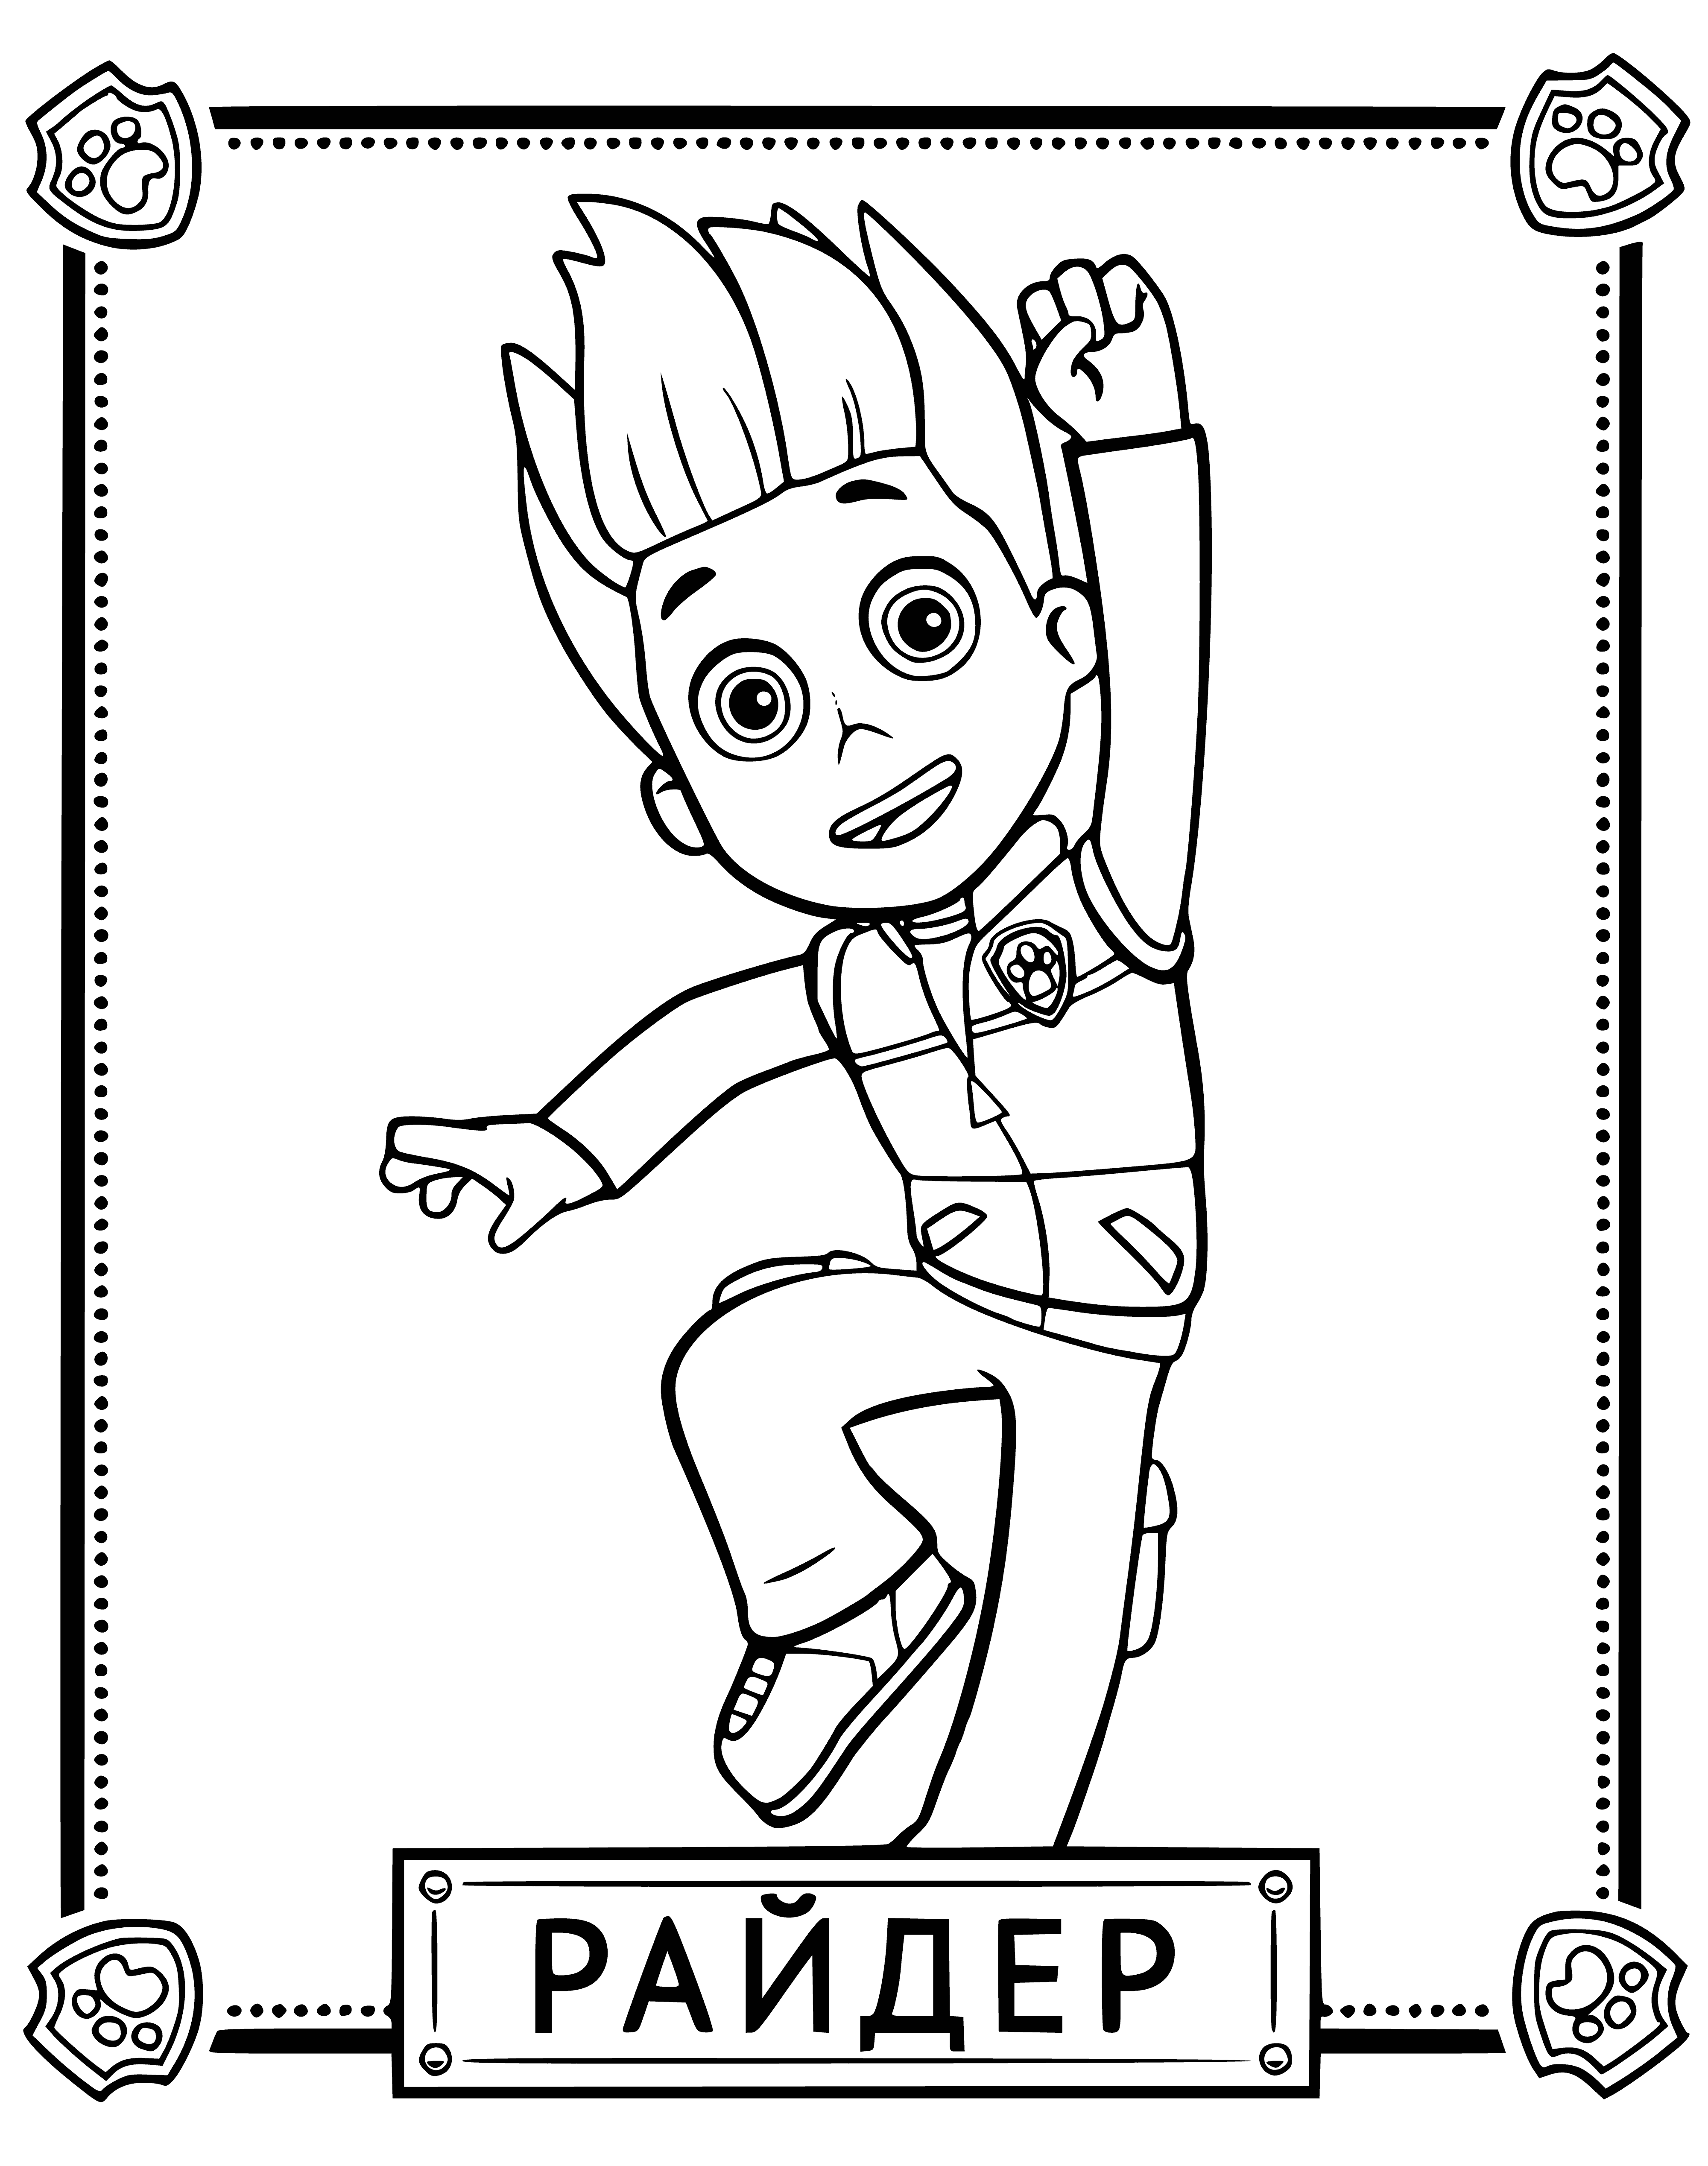 coloring page: A toy PAW Patrol Rider that a child can ride - yellow with logo, two handlebars/wheels, seat & backrest.